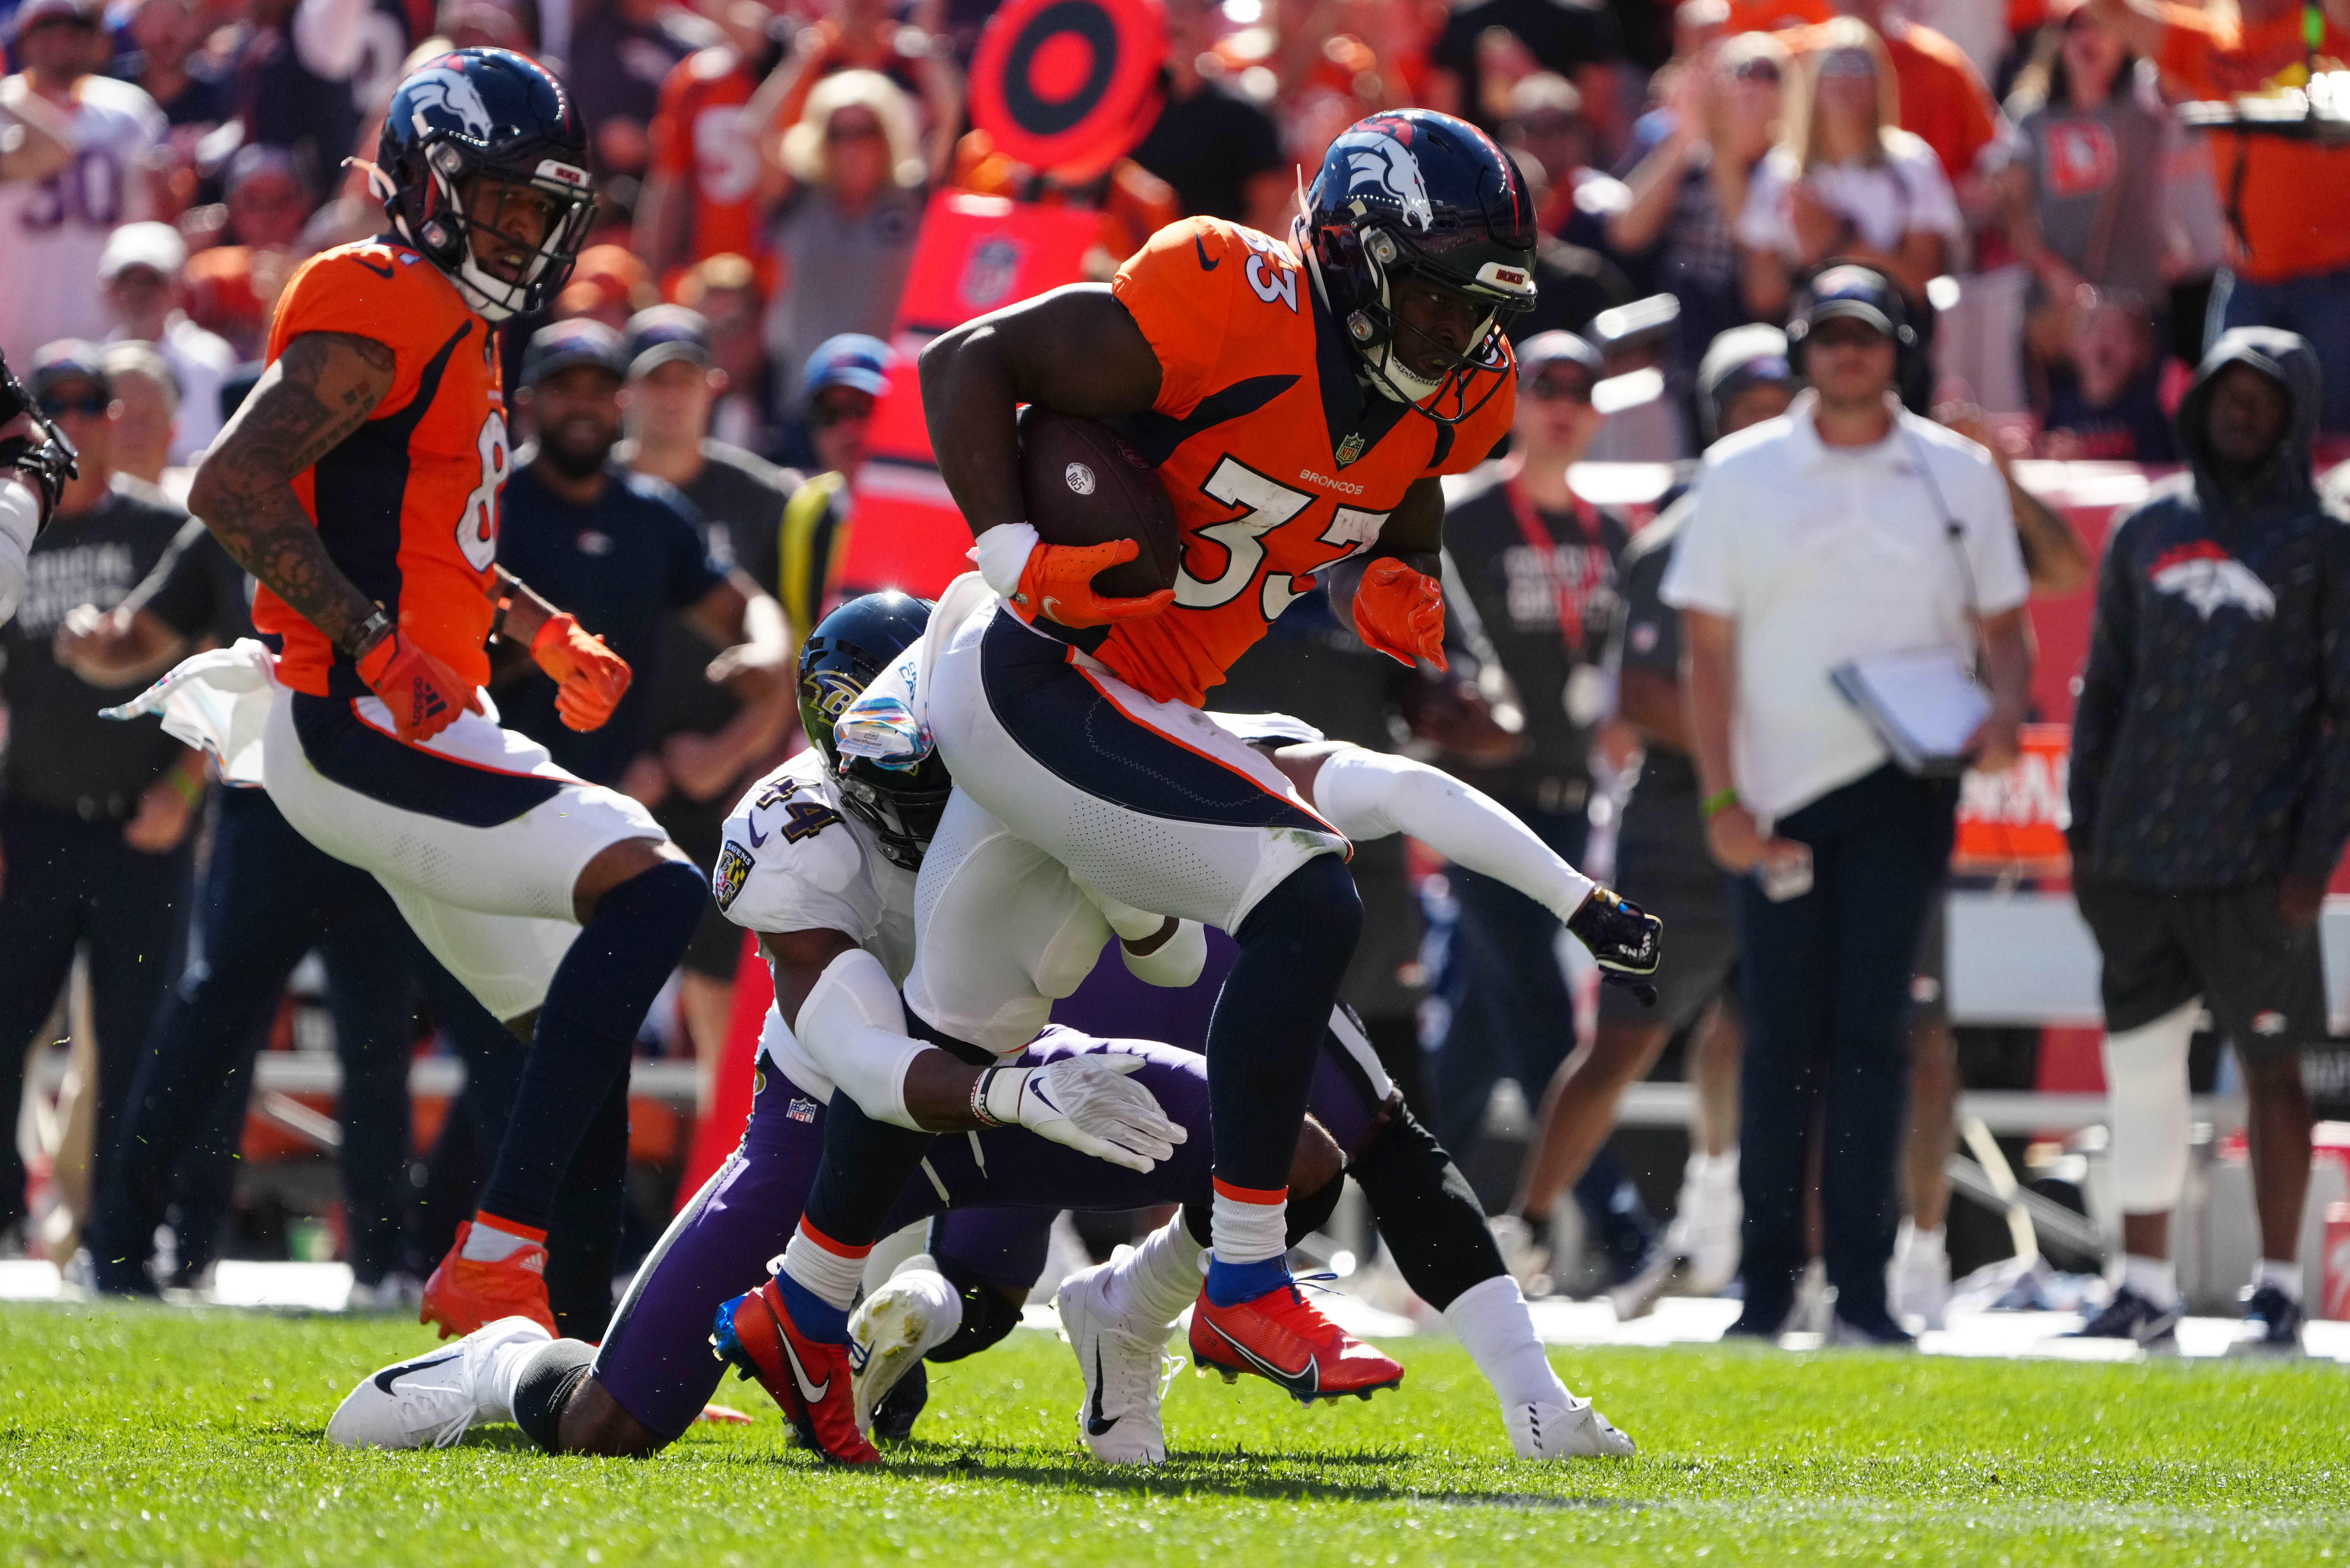 Baltimore Ravens cornerback Marlon Humphrey (44) attempts to tackle Denver Broncos running back Javonte Williams (33) in the first quarter at Empower Field at Mile High.